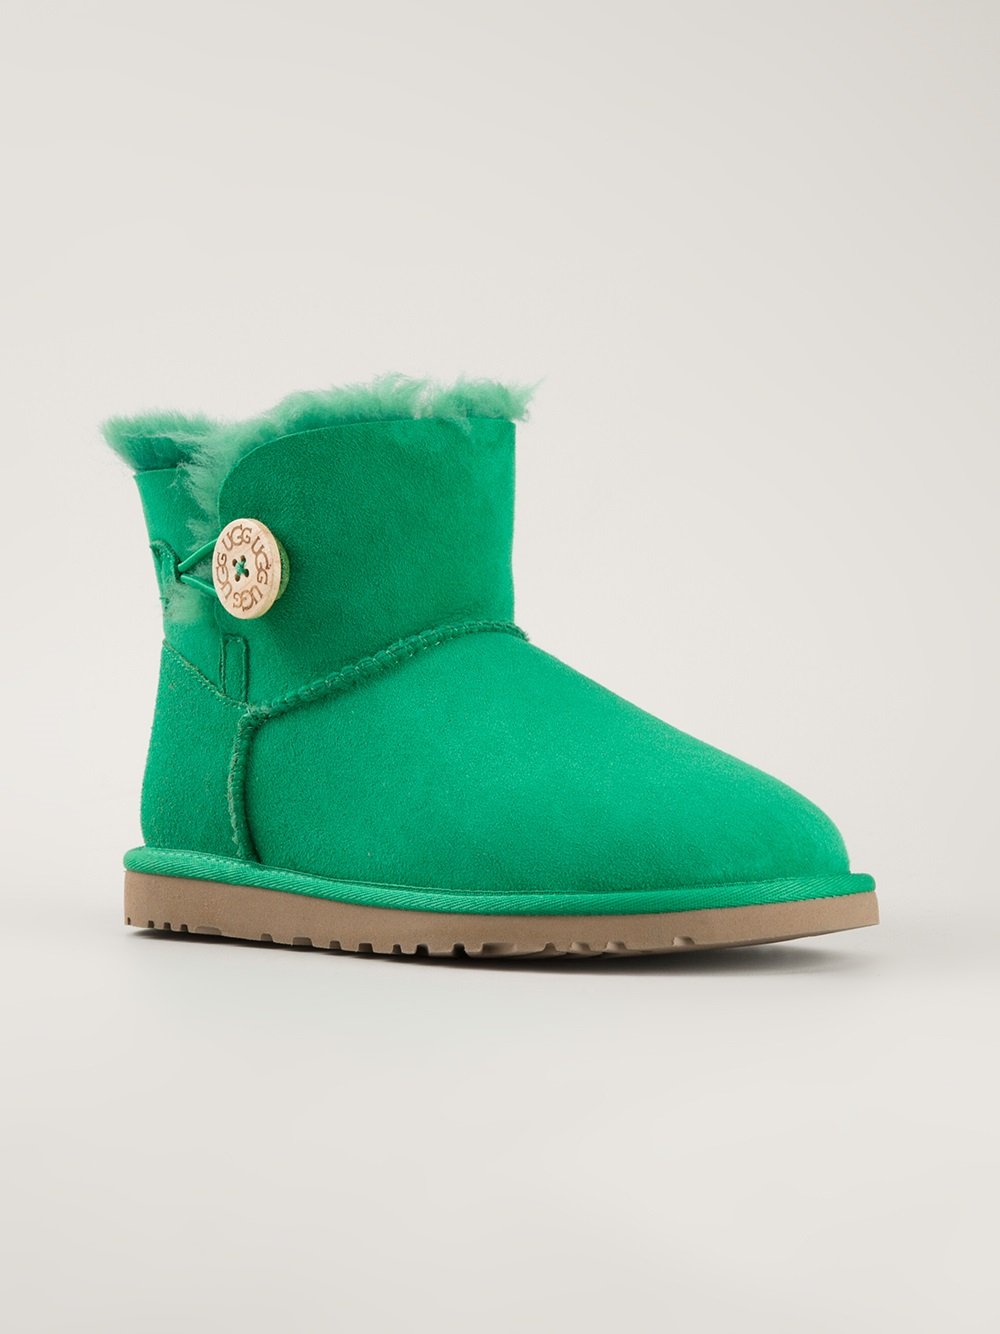 UGG Mini Bailey Button Boot in Green - Lyst